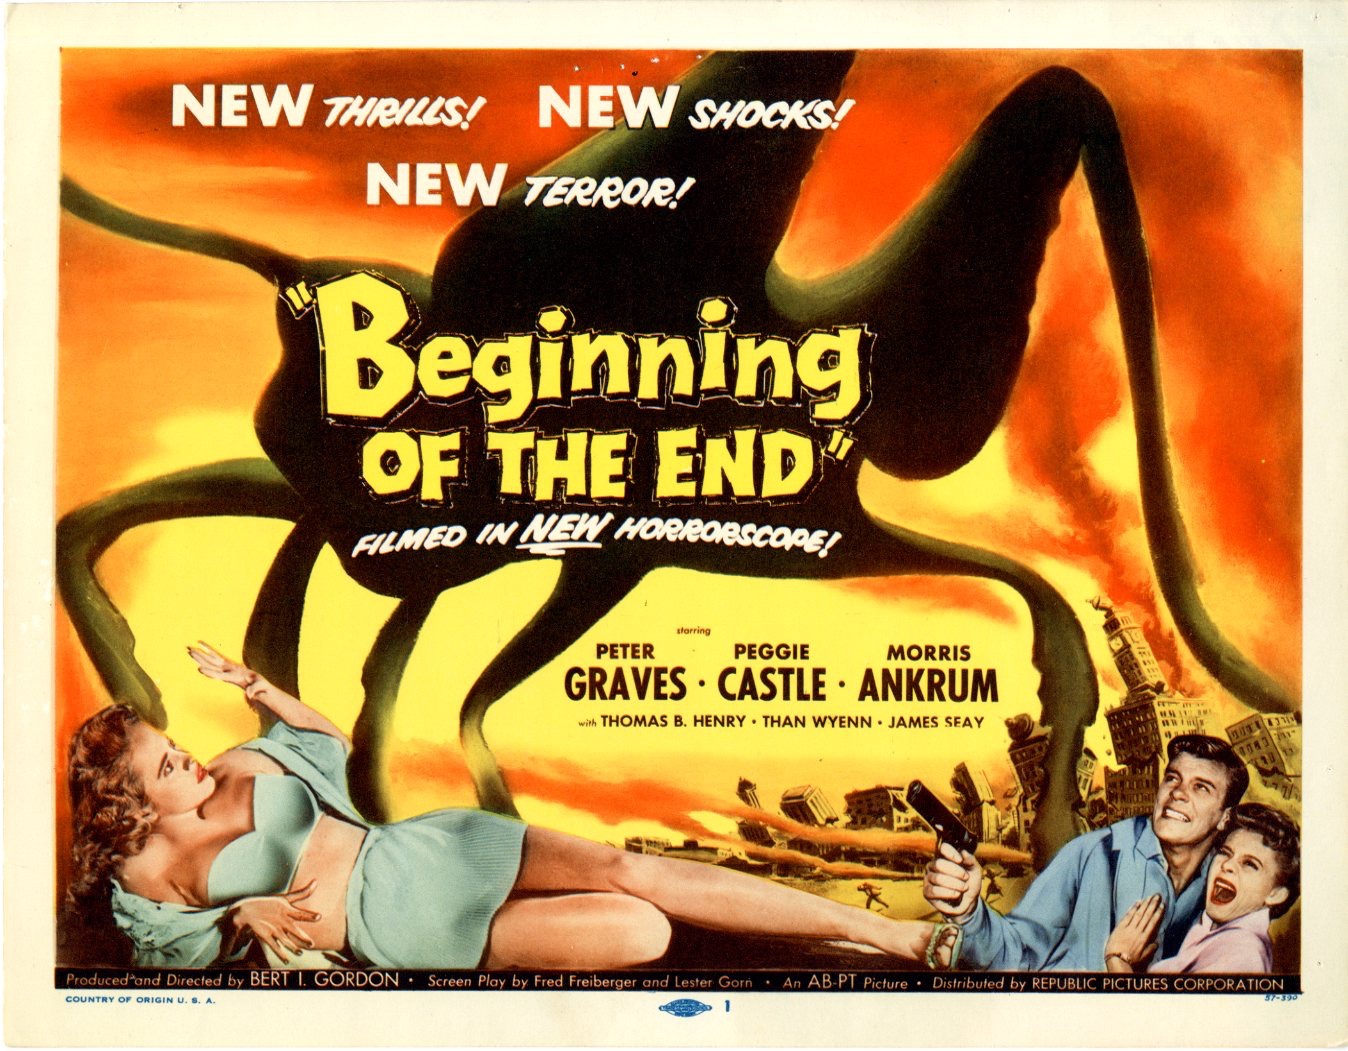 Beginning Of The End   1957 - Primary